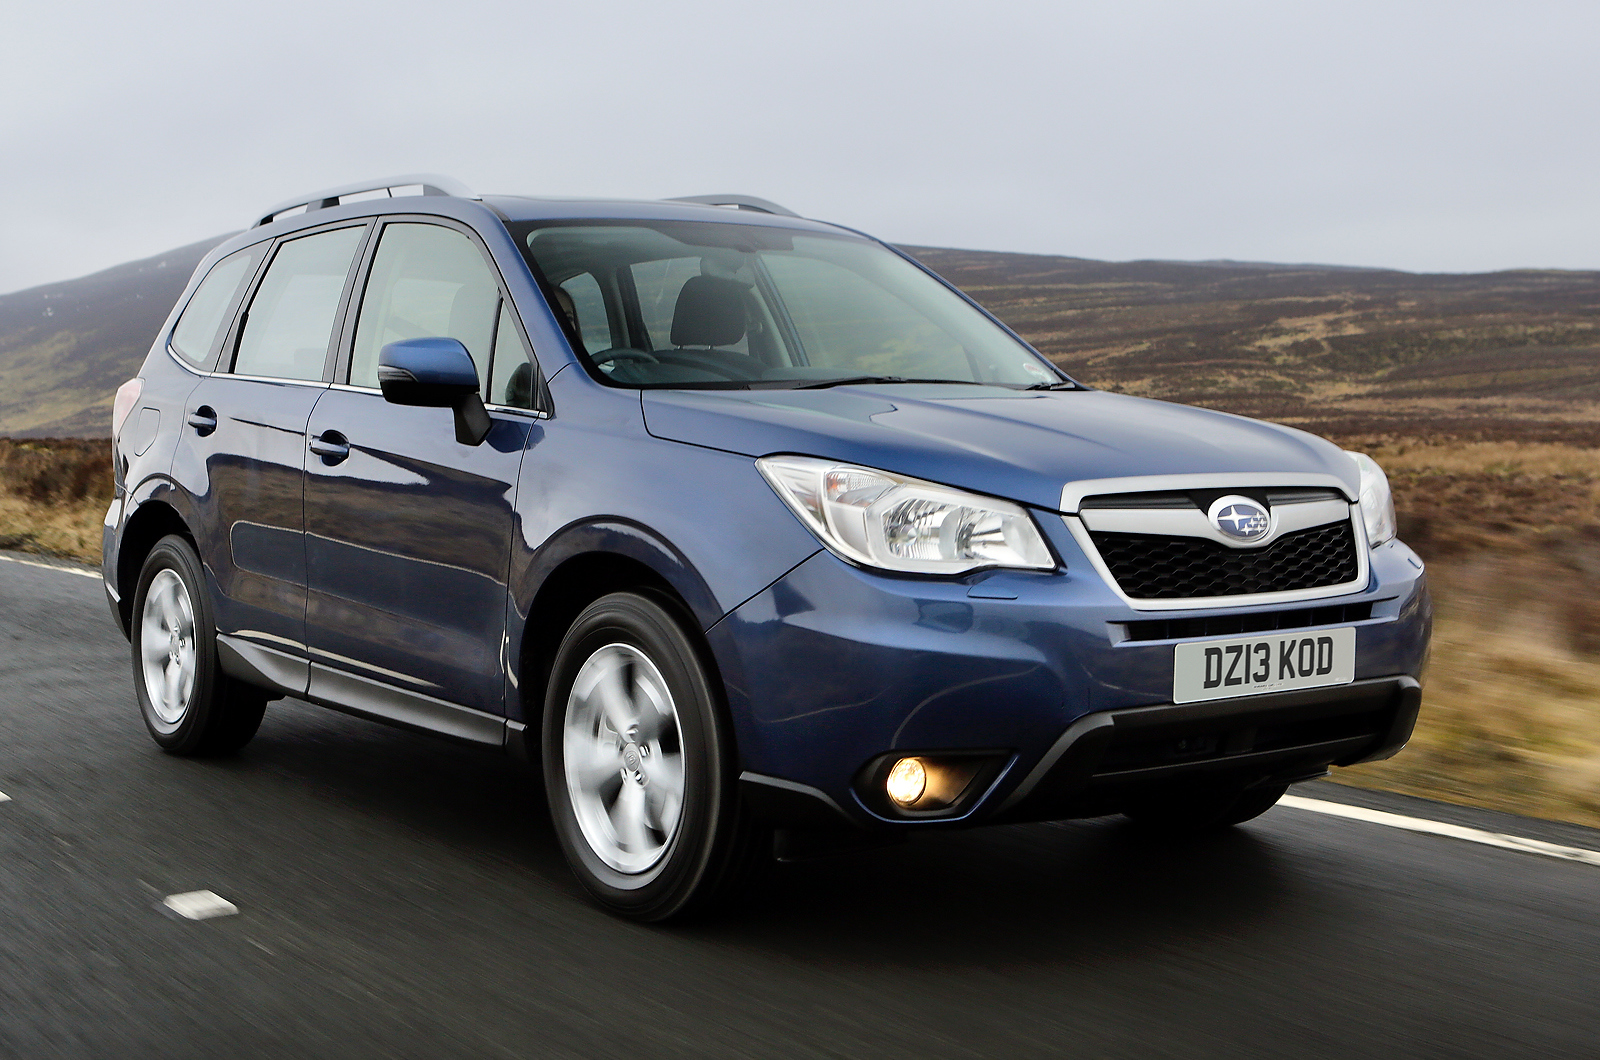 2013 Subaru Forester 2.0D XC first drive review Review Autocar